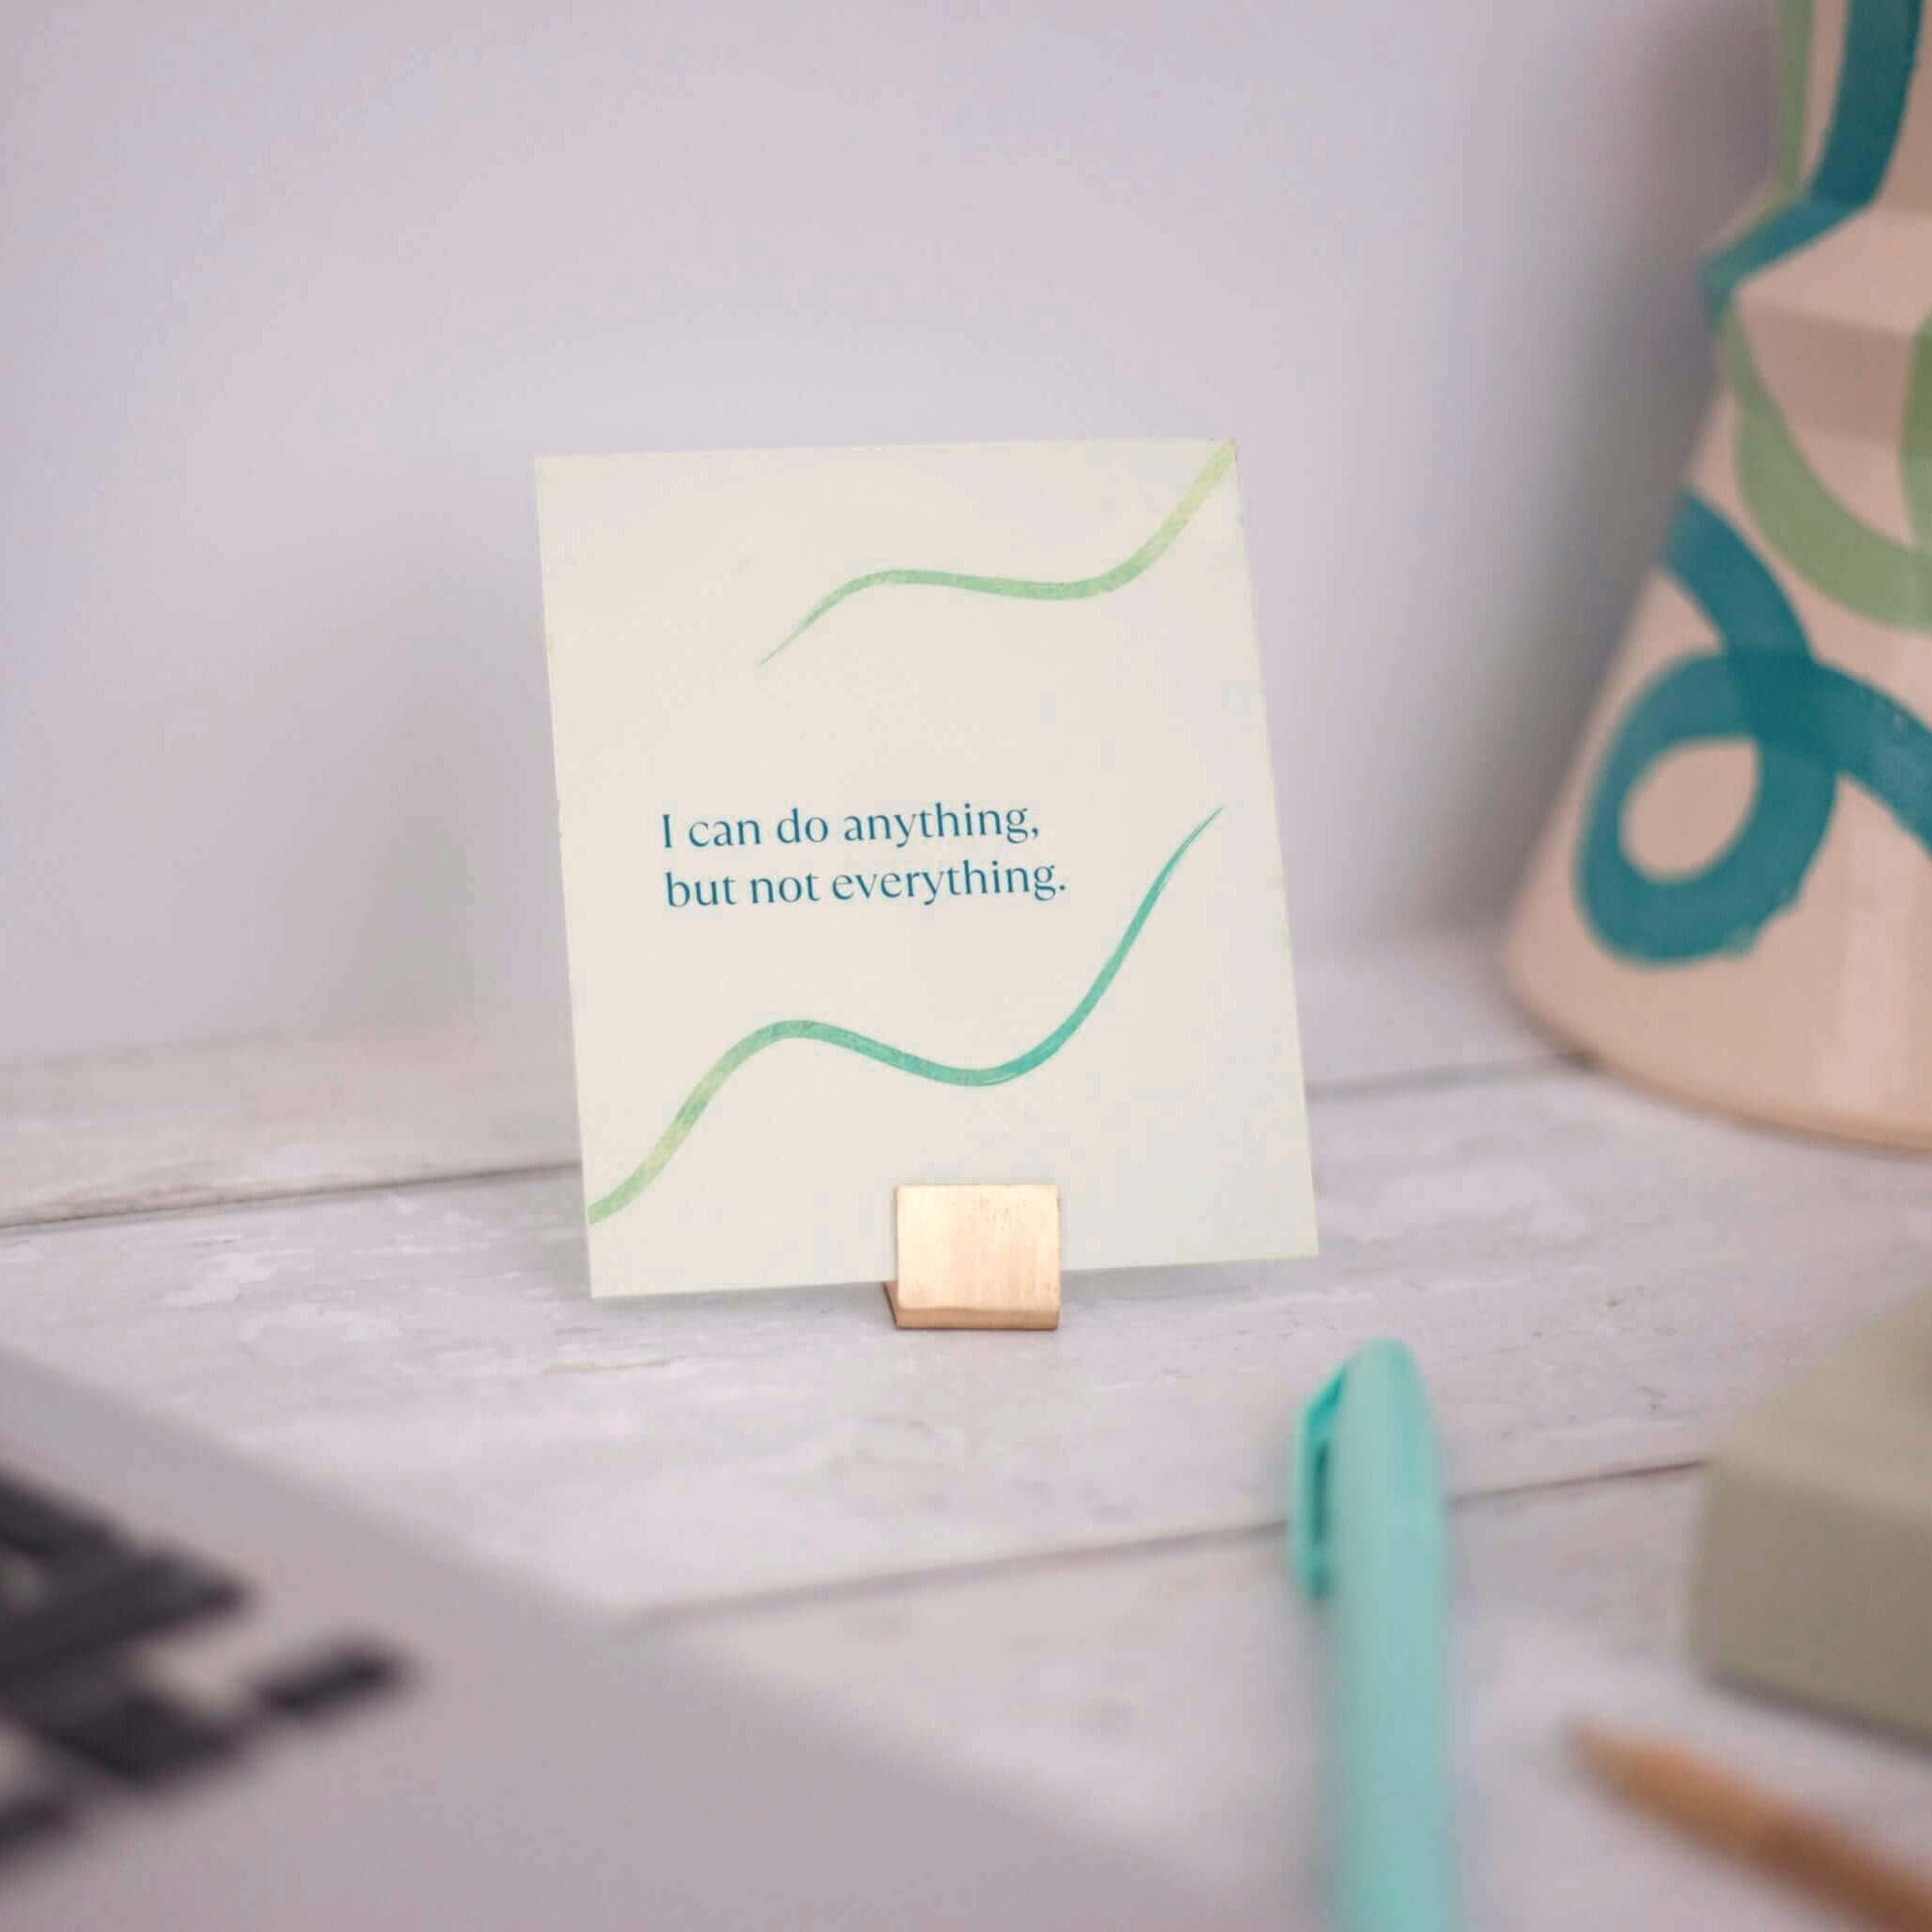 self-compassion affirmation card on stand